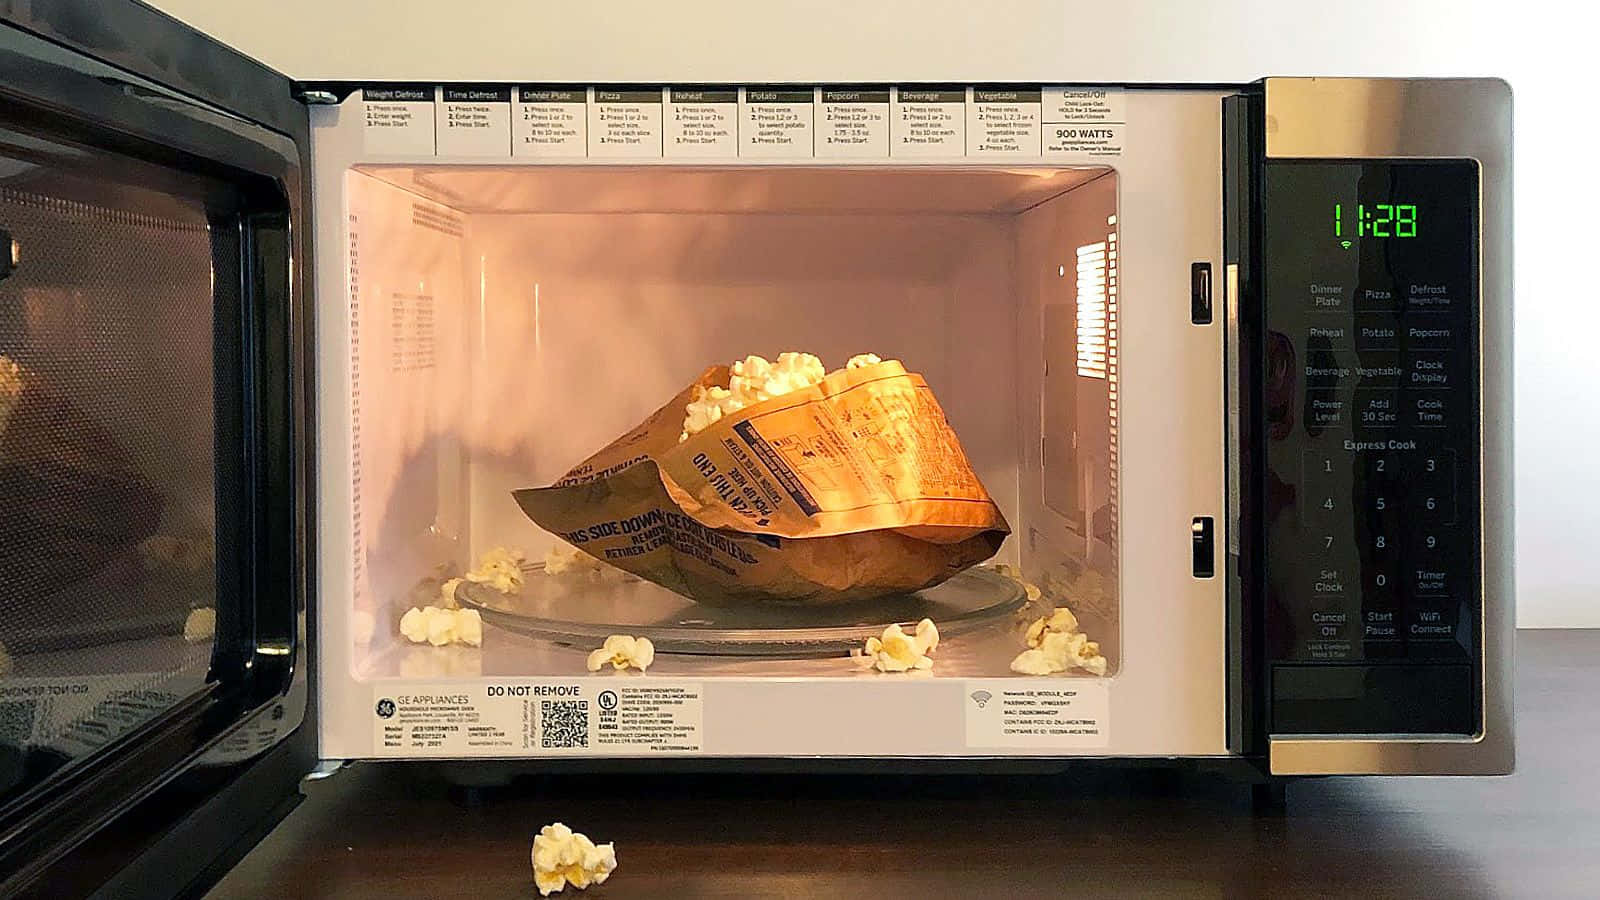 Enjoy your meal in short time with a microwave